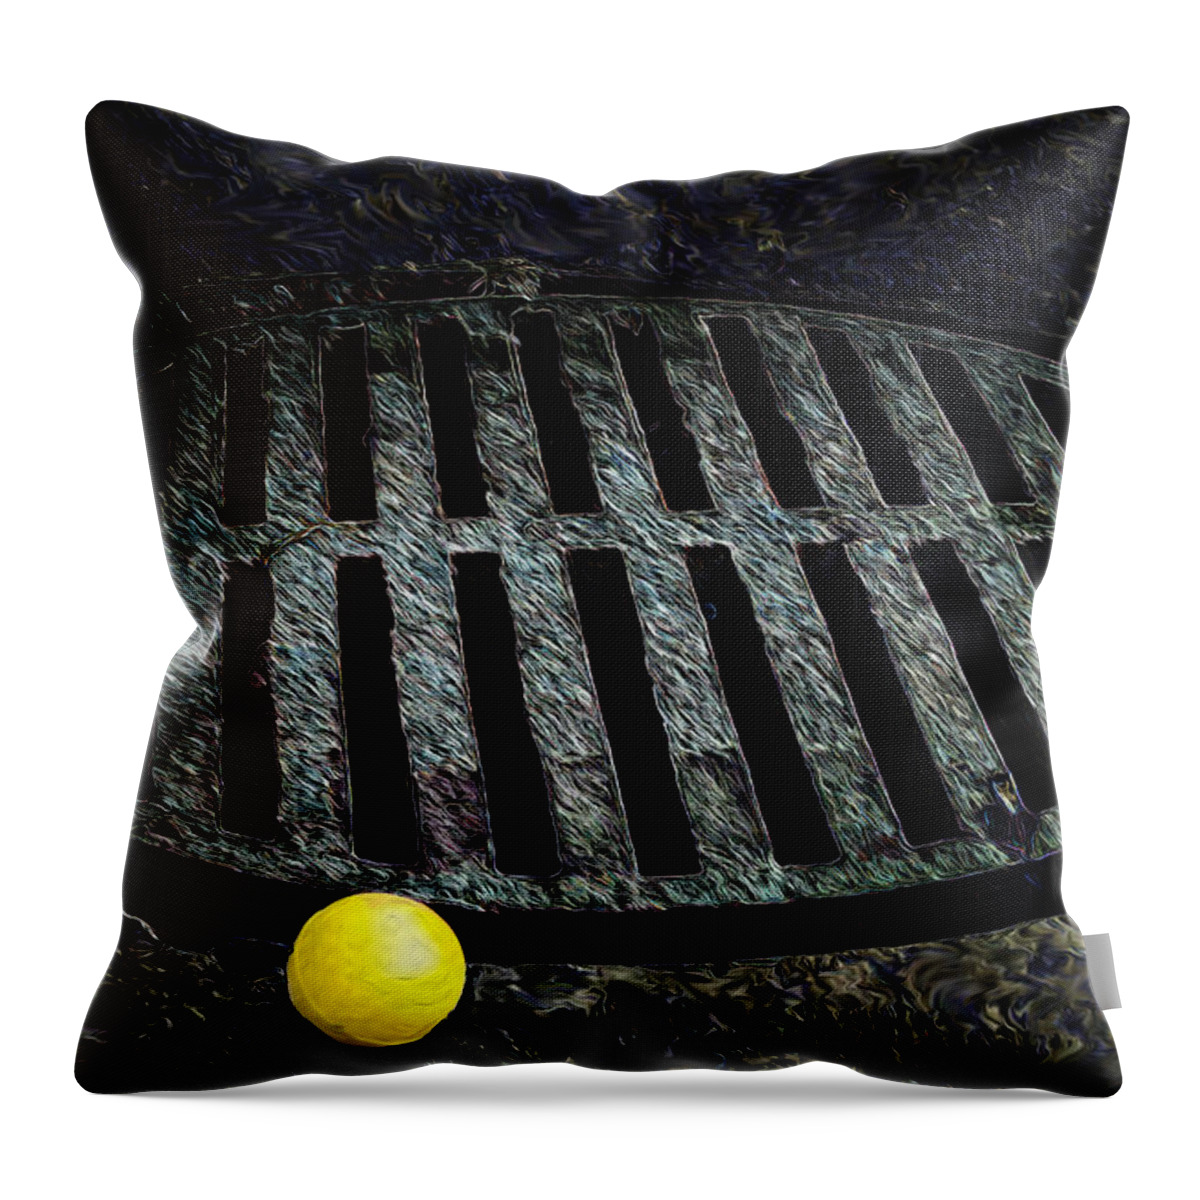 Dog Throw Pillow featuring the digital art Dogs Eye View by Georgianne Giese